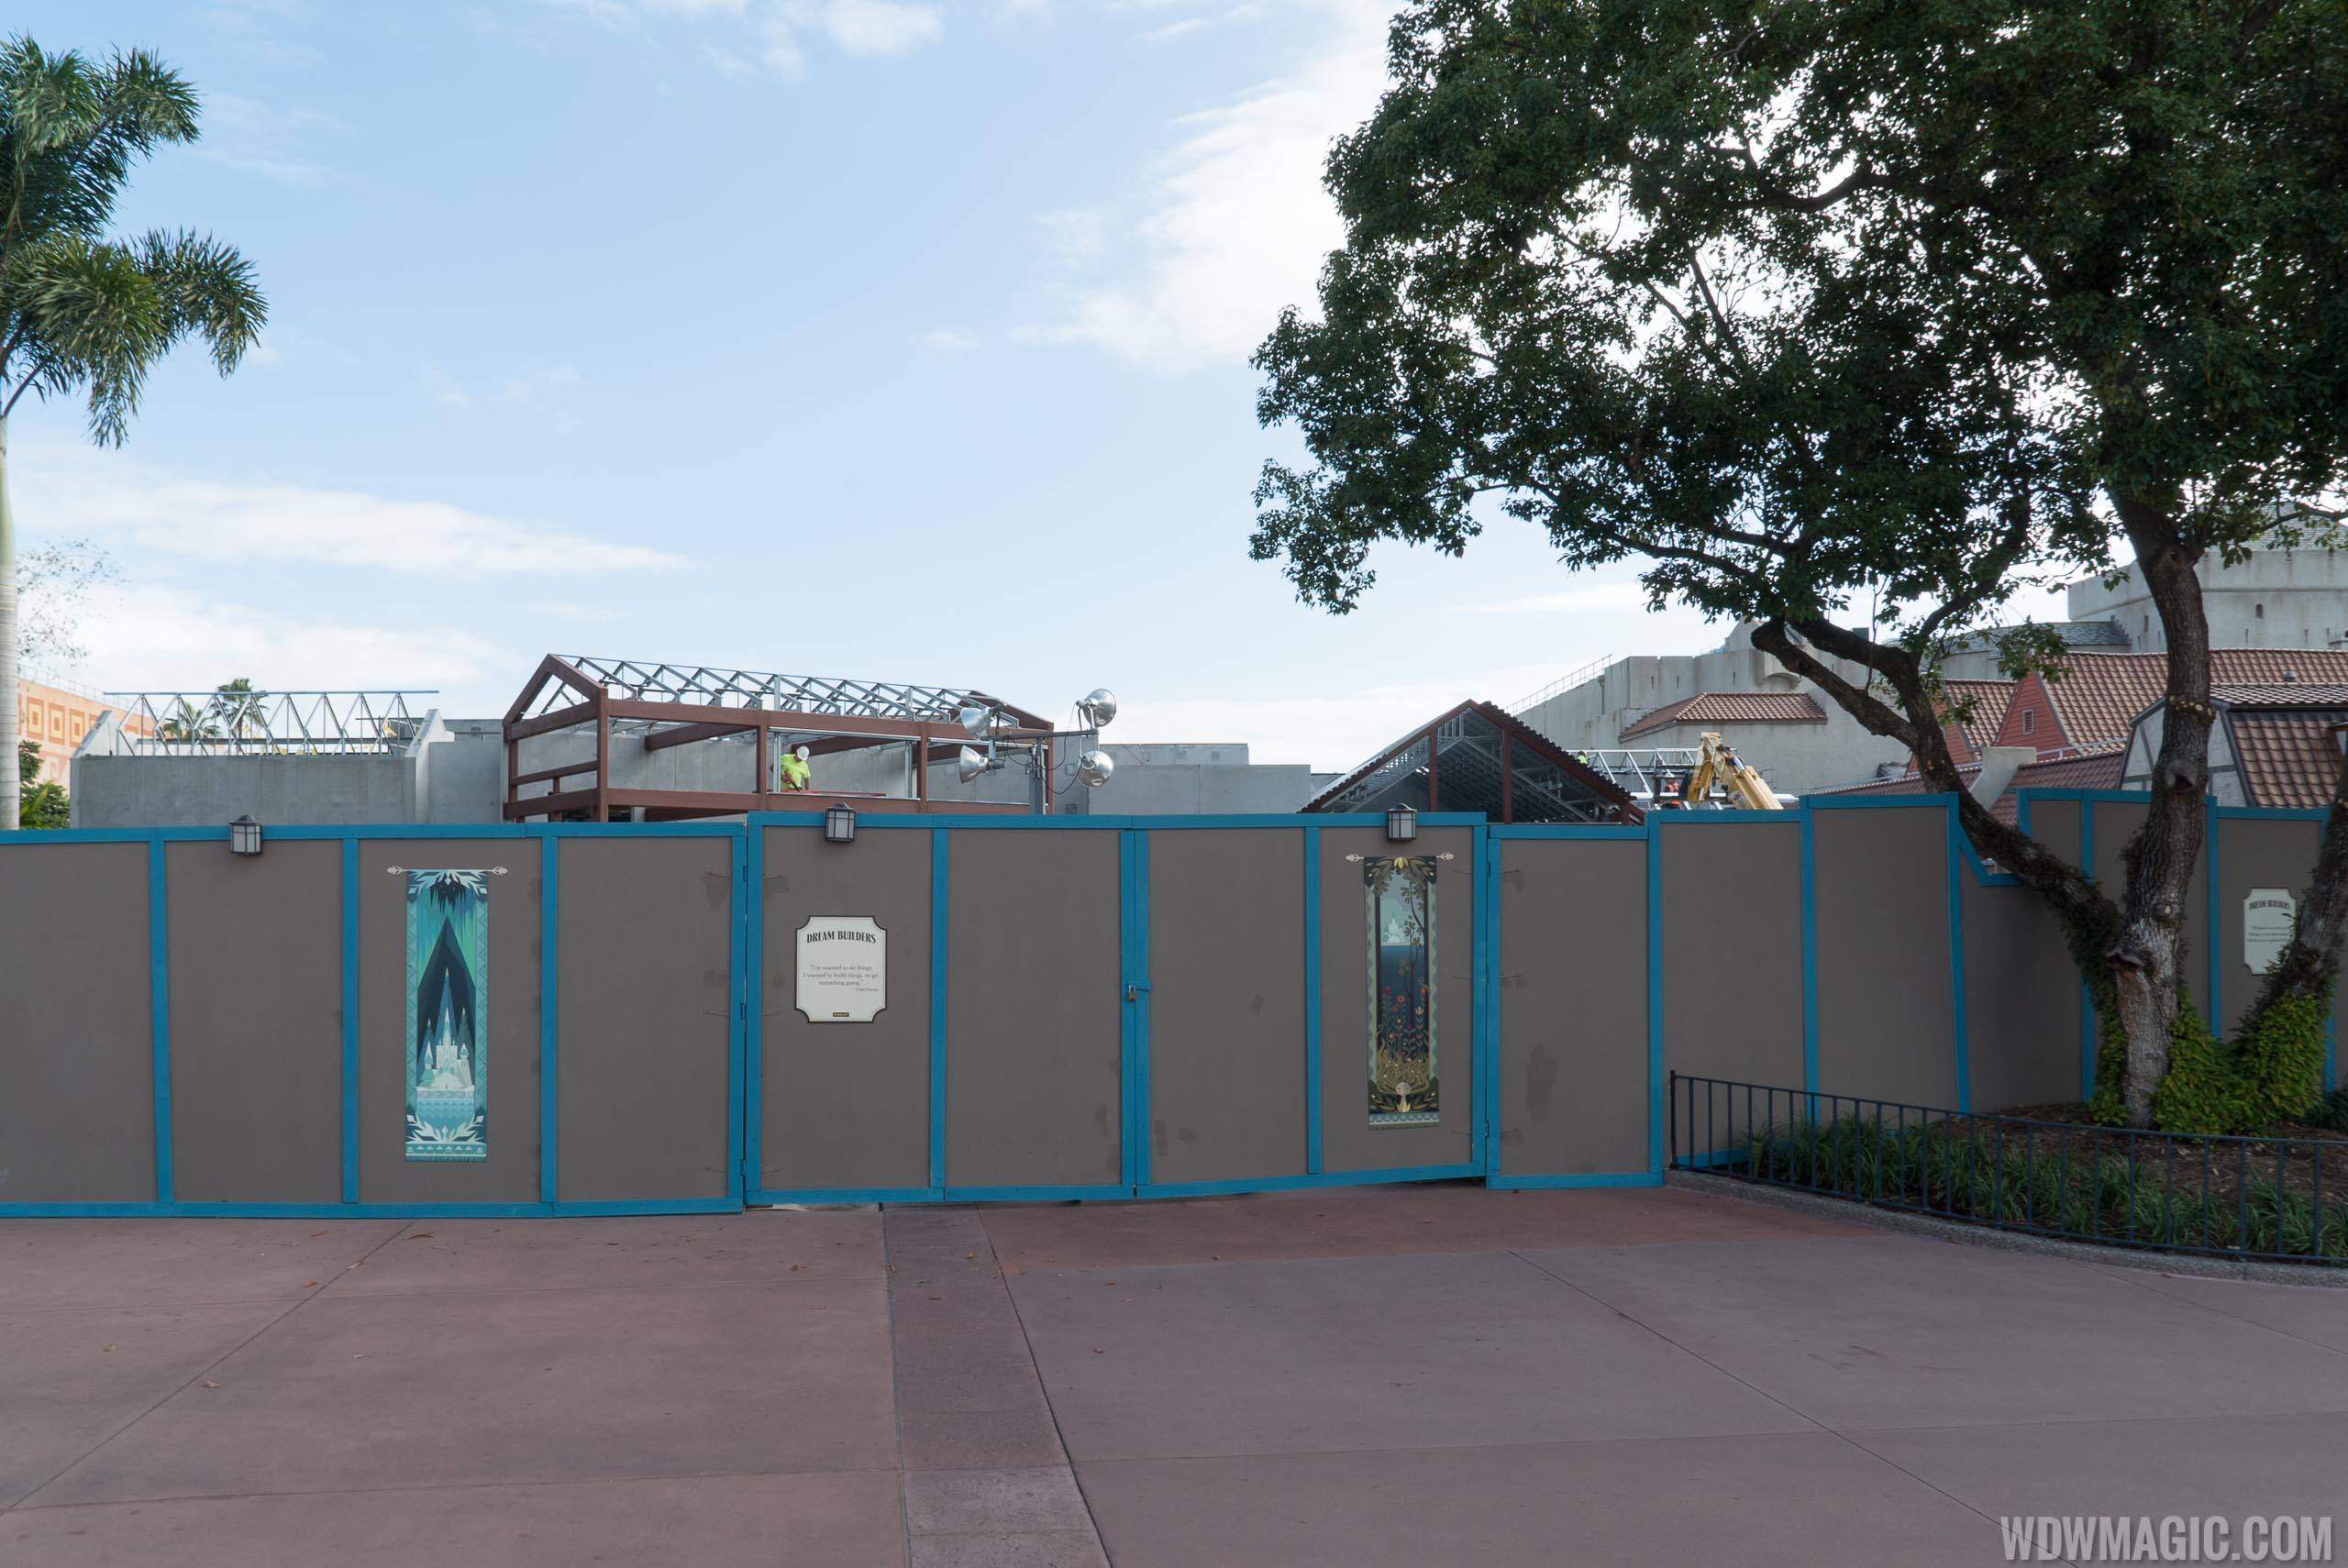 PHOTOS - Updated look at the Royal Sommerhus Frozen meet and greet construction at Epcot's Norway Pavilion